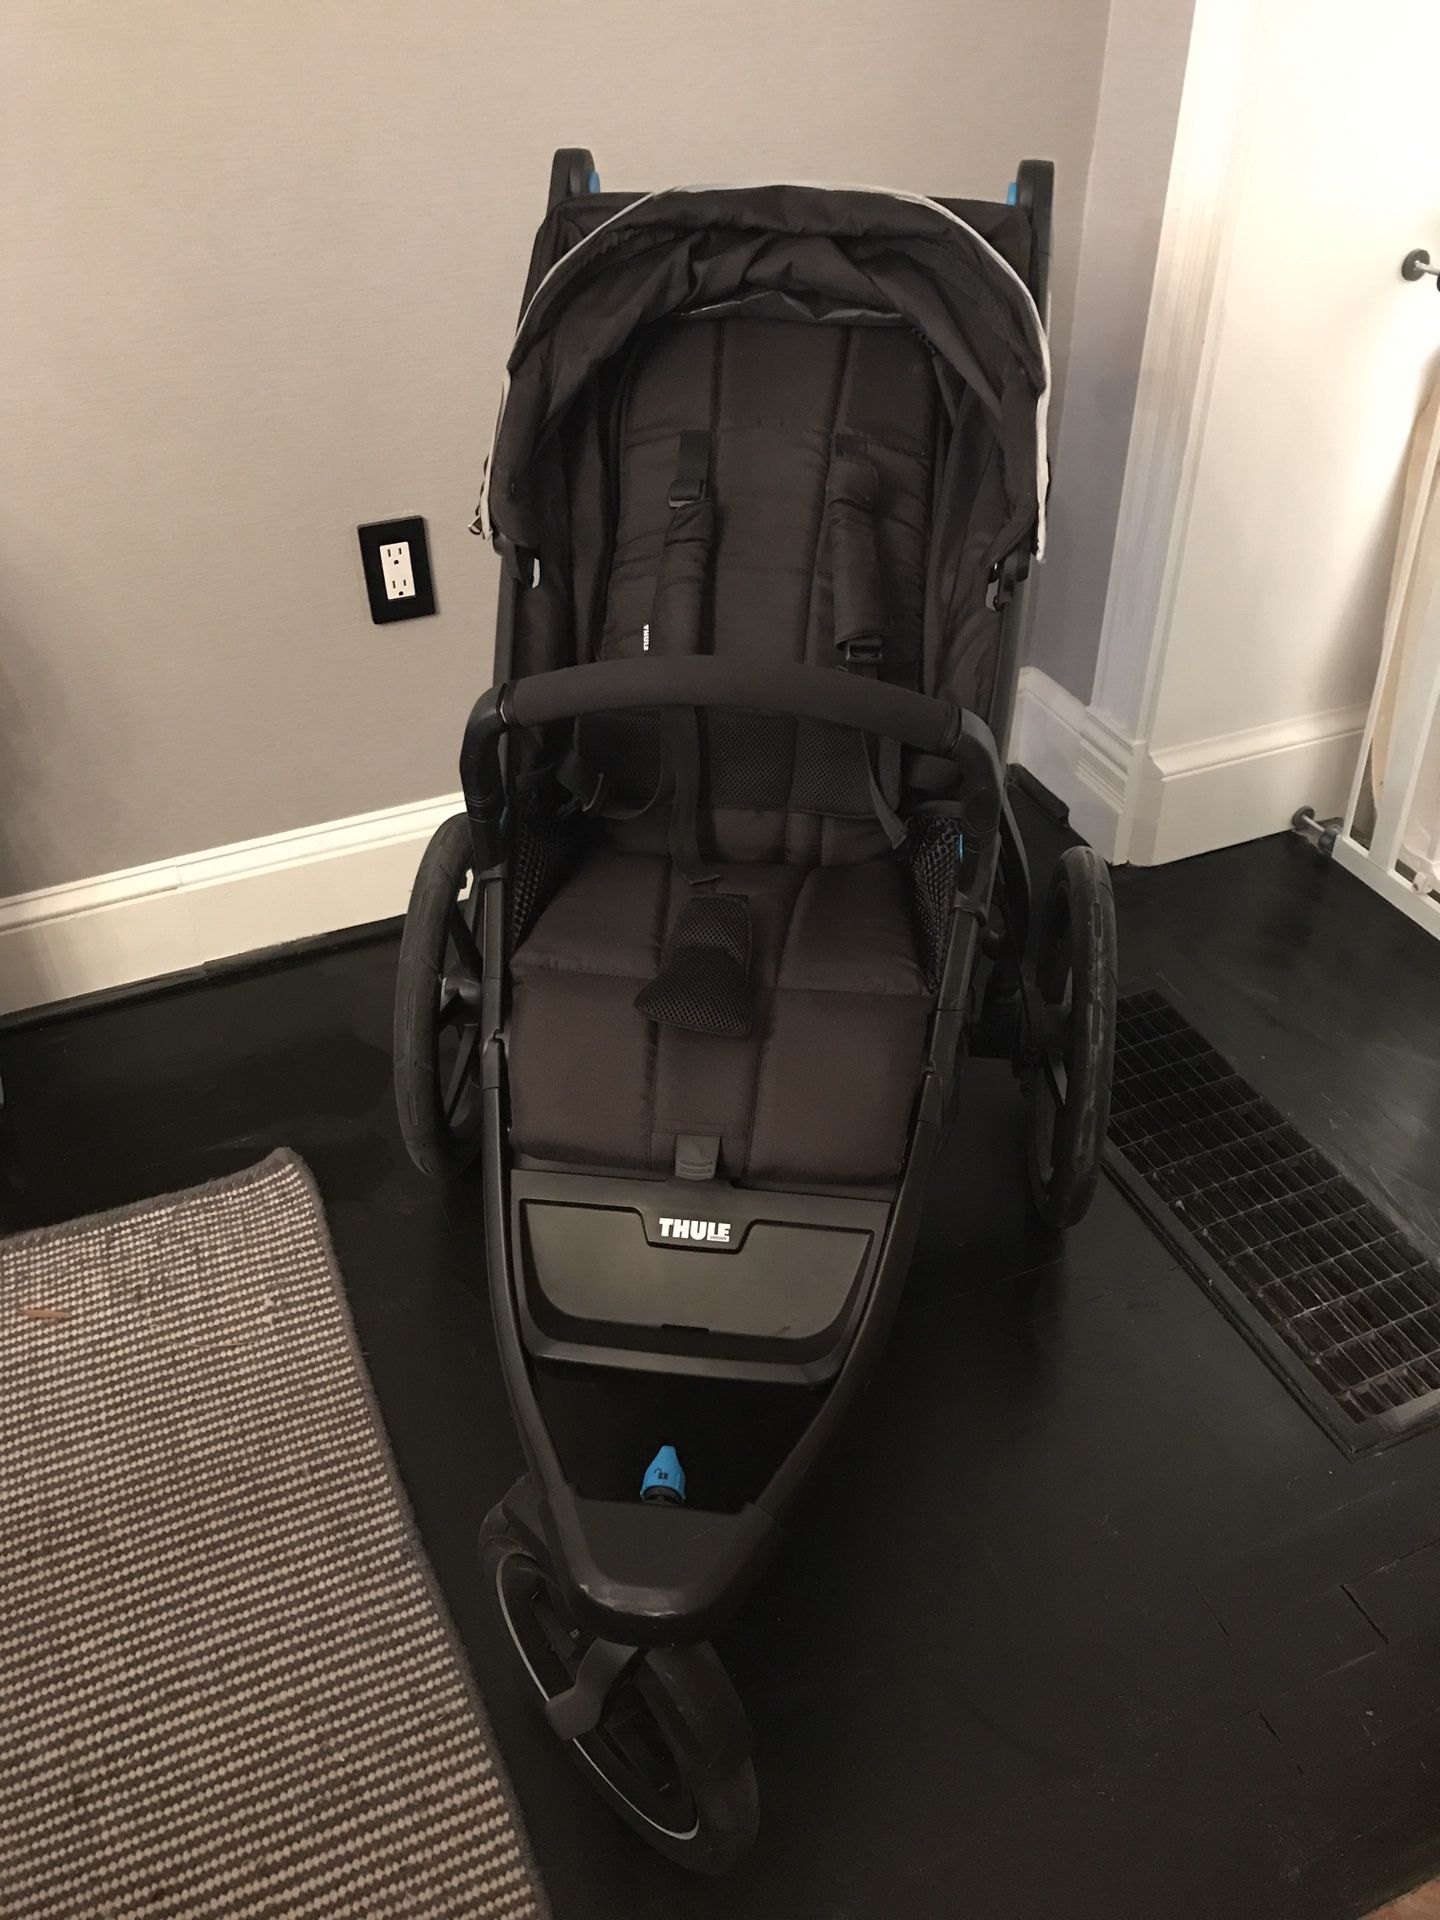 Thule Urban Glide 2 jogging stroller and accessories